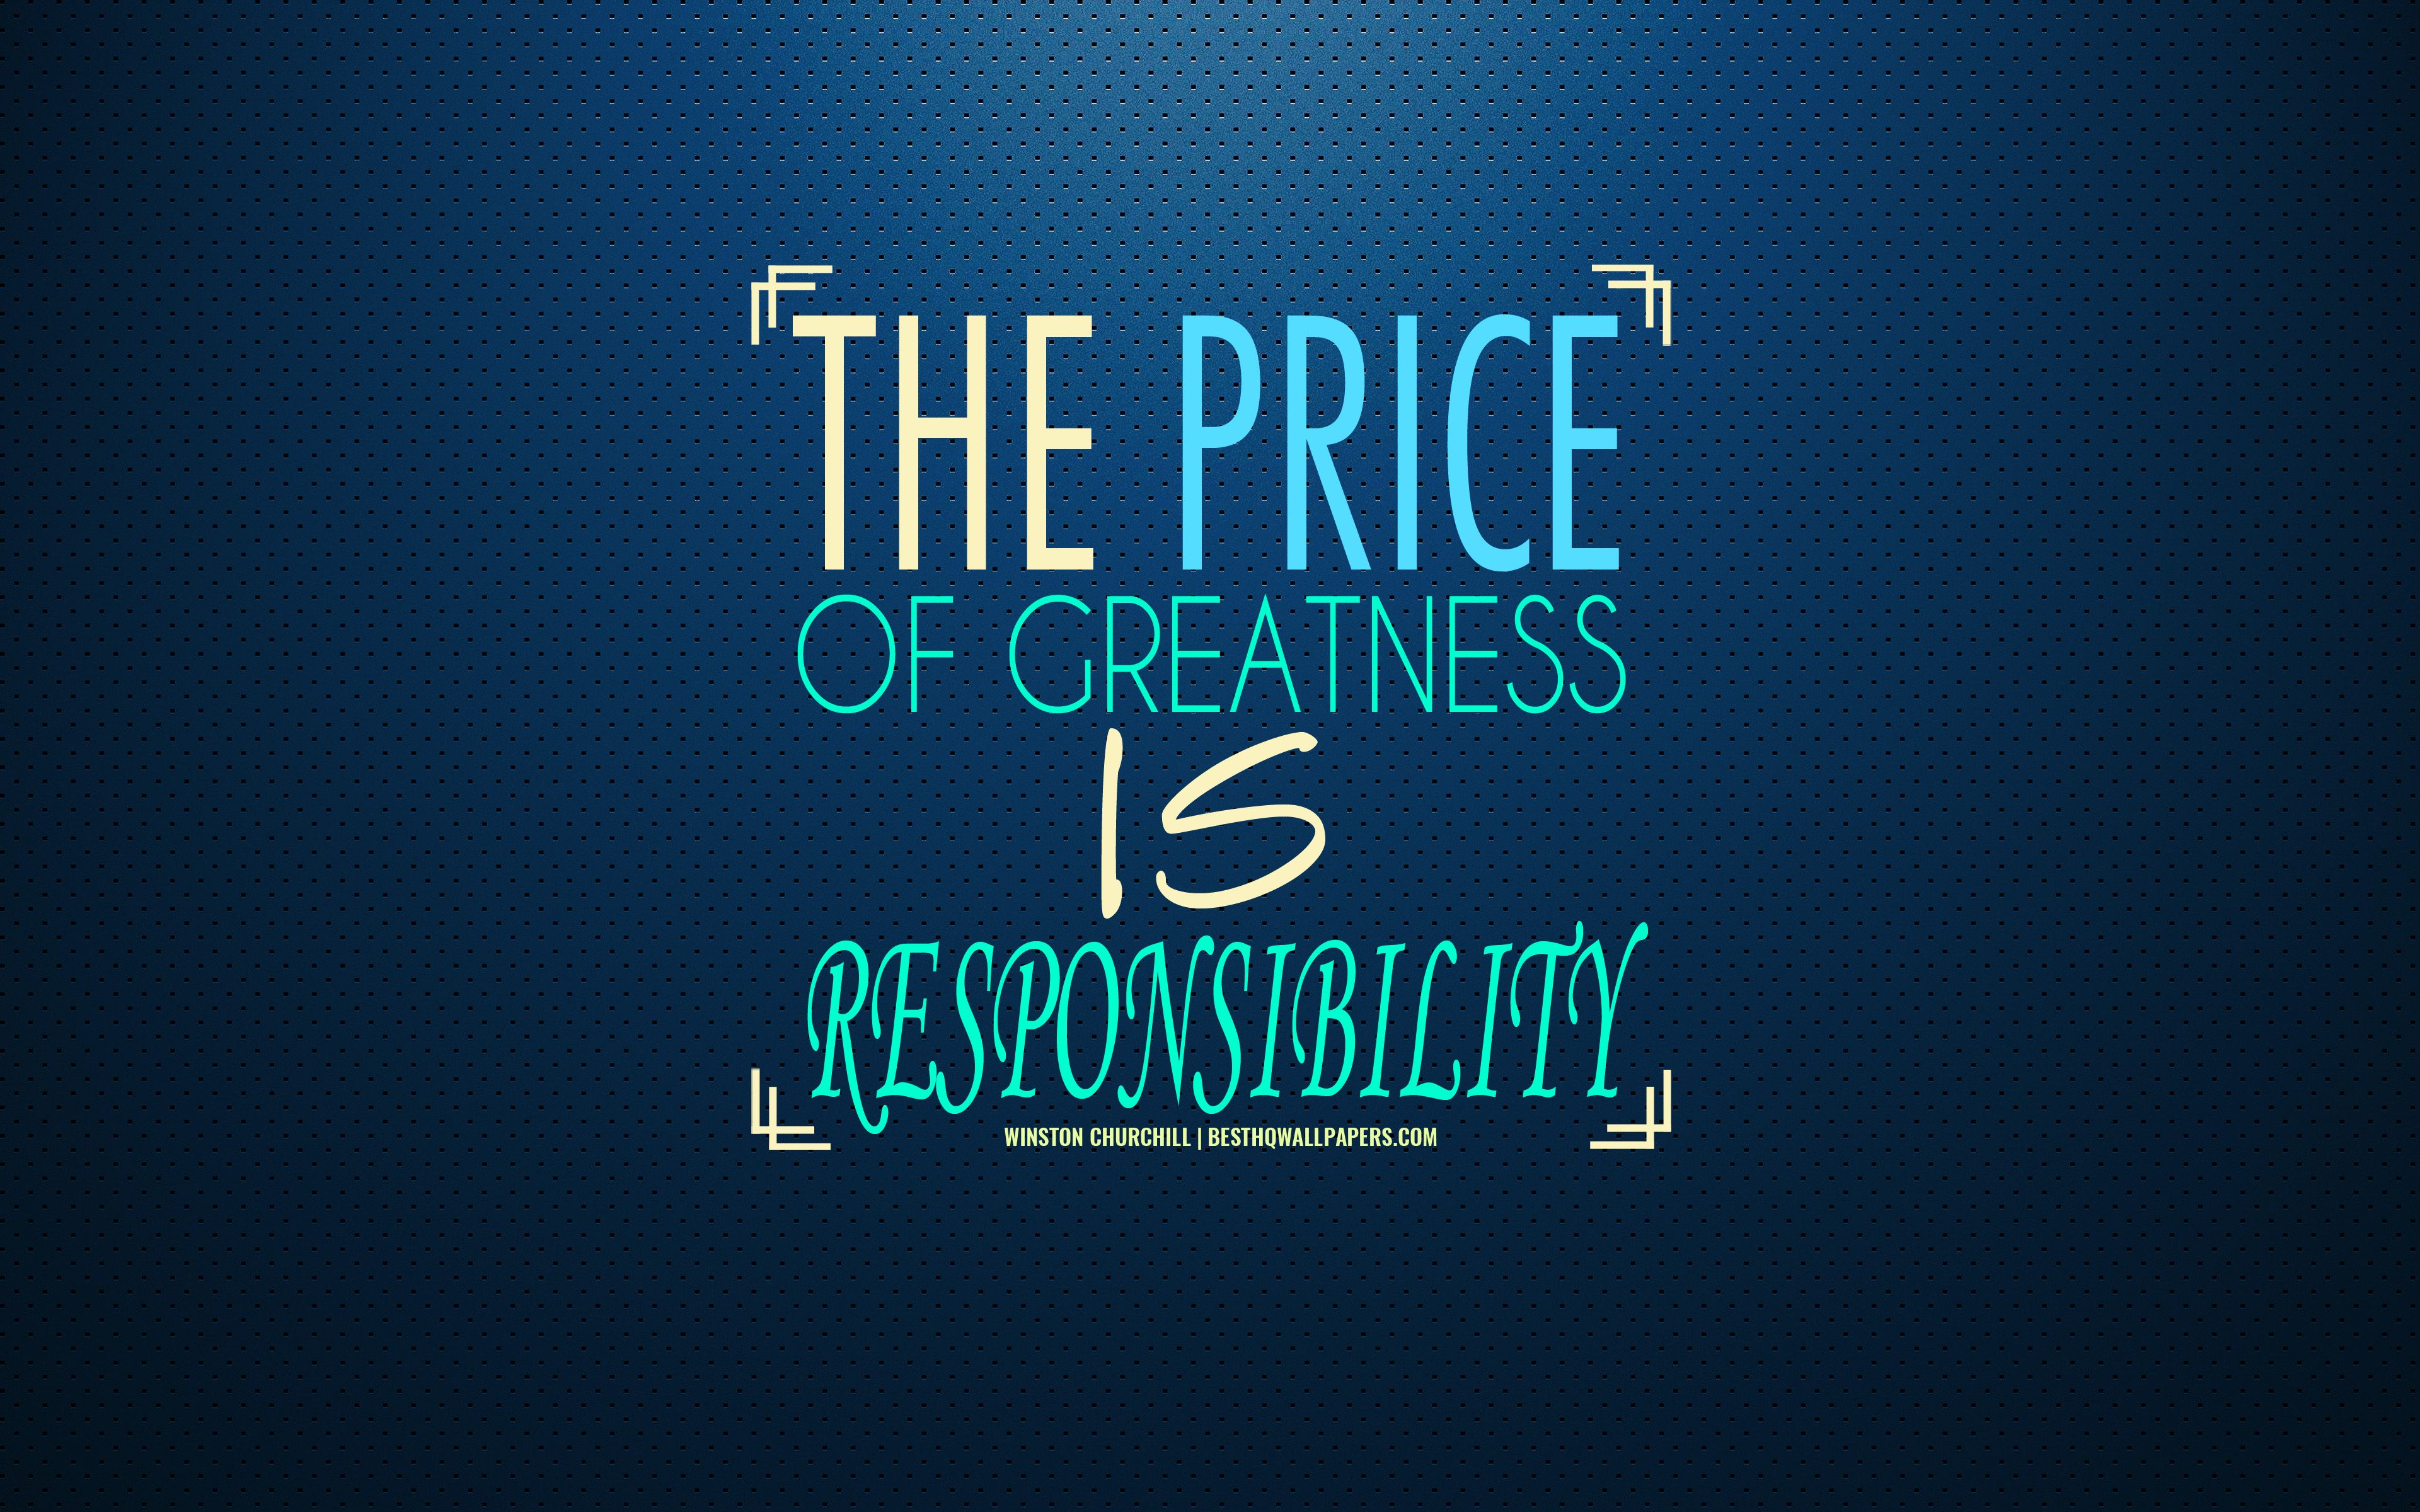 Download wallpaper The price of greatness is responsibility, Winston Churchill, blue stylish background, quotes of great people, quotes about greatness for desktop with resolution 3840x2400. High Quality HD picture wallpaper